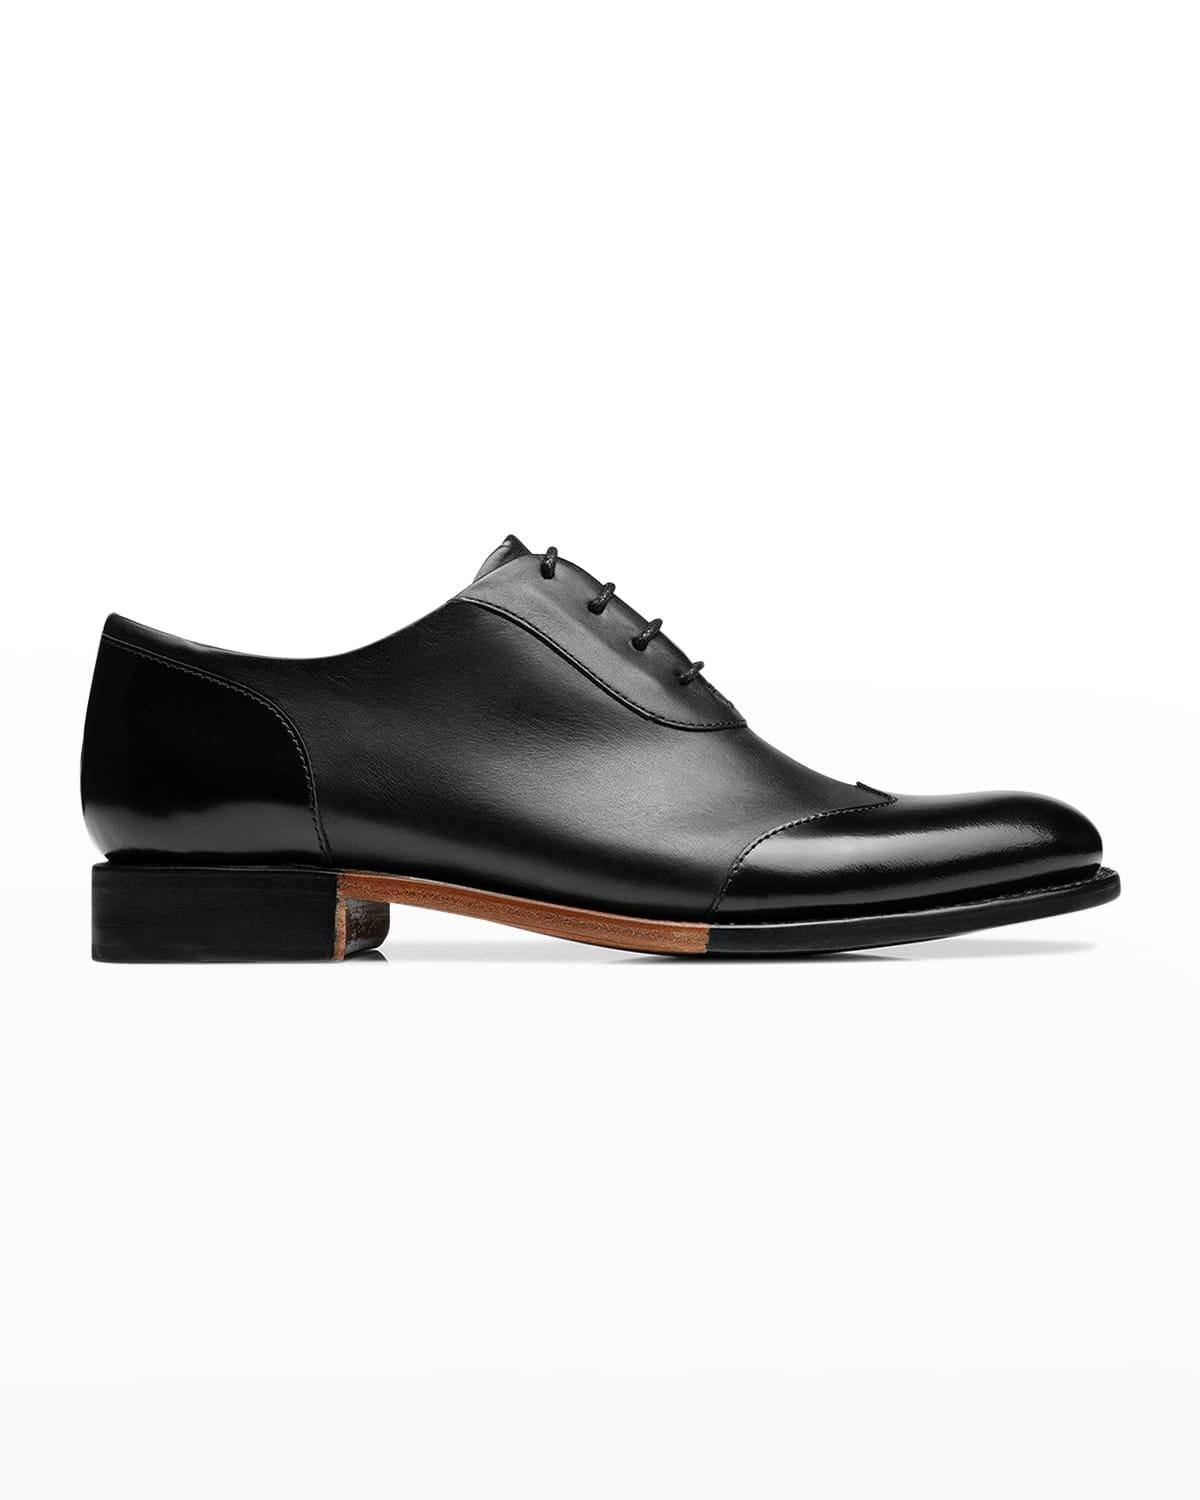 Mr. Evans Wing-Tip Oxfords by THE OFFICE OF ANGELA SCOTT